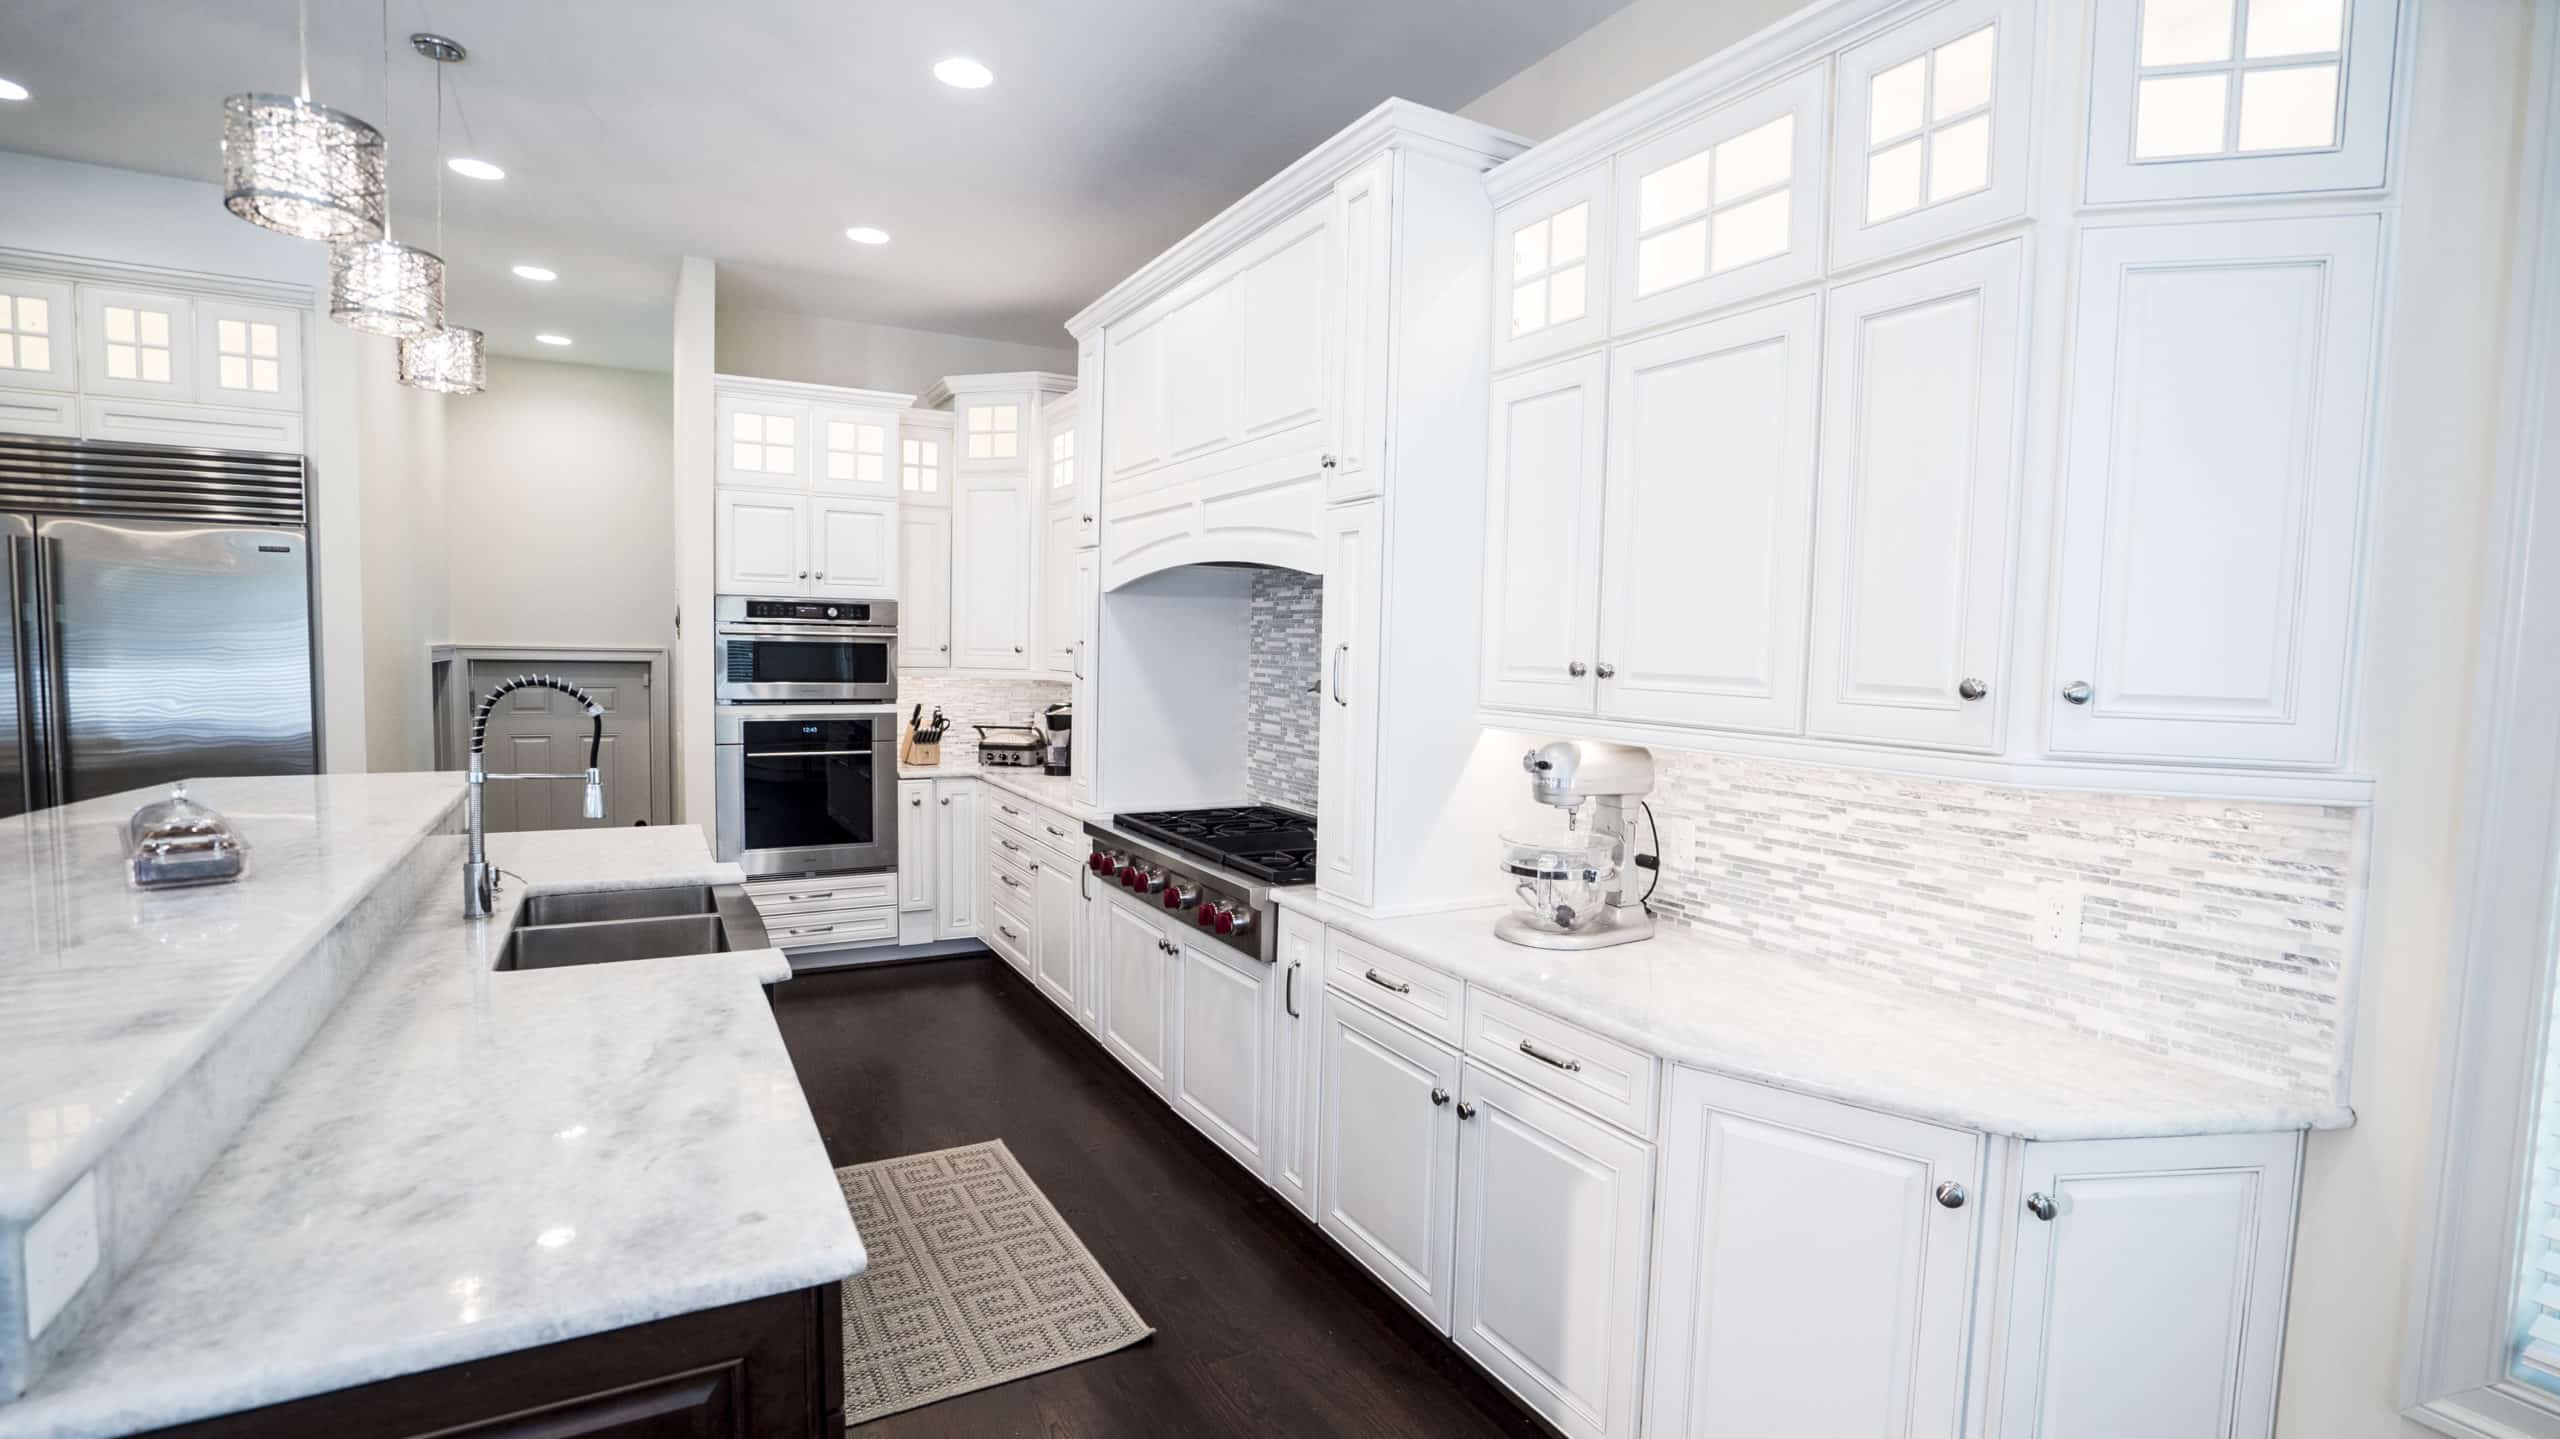 kitchen with white cabinets and marble counter tops, creating a sleek and elegant design